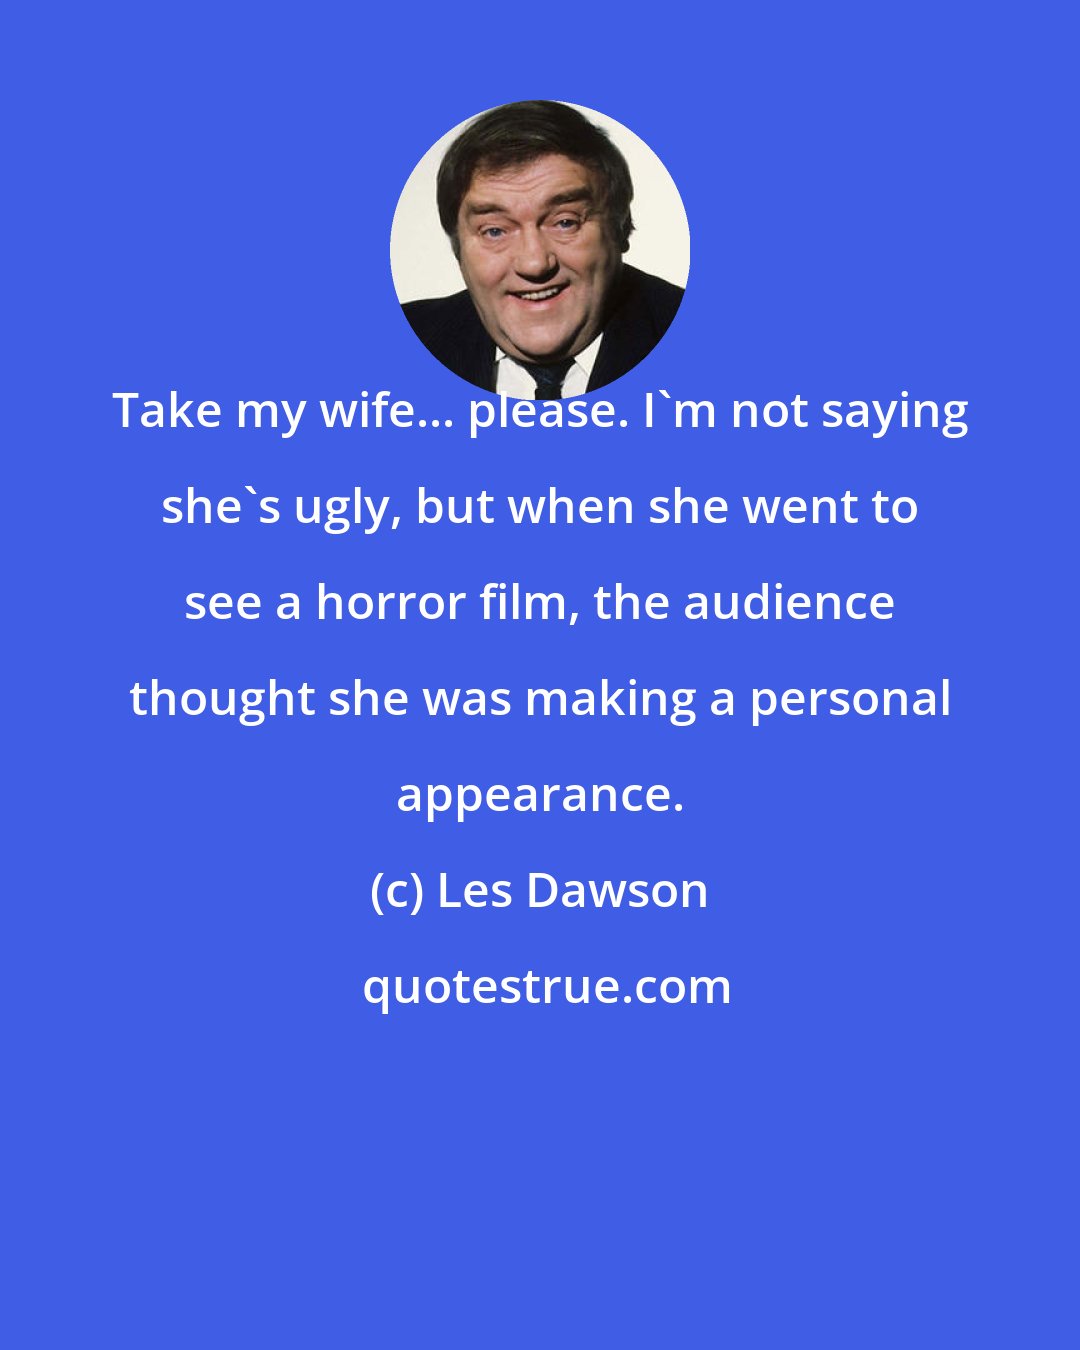 Les Dawson: Take my wife... please. I'm not saying she's ugly, but when she went to see a horror film, the audience thought she was making a personal appearance.